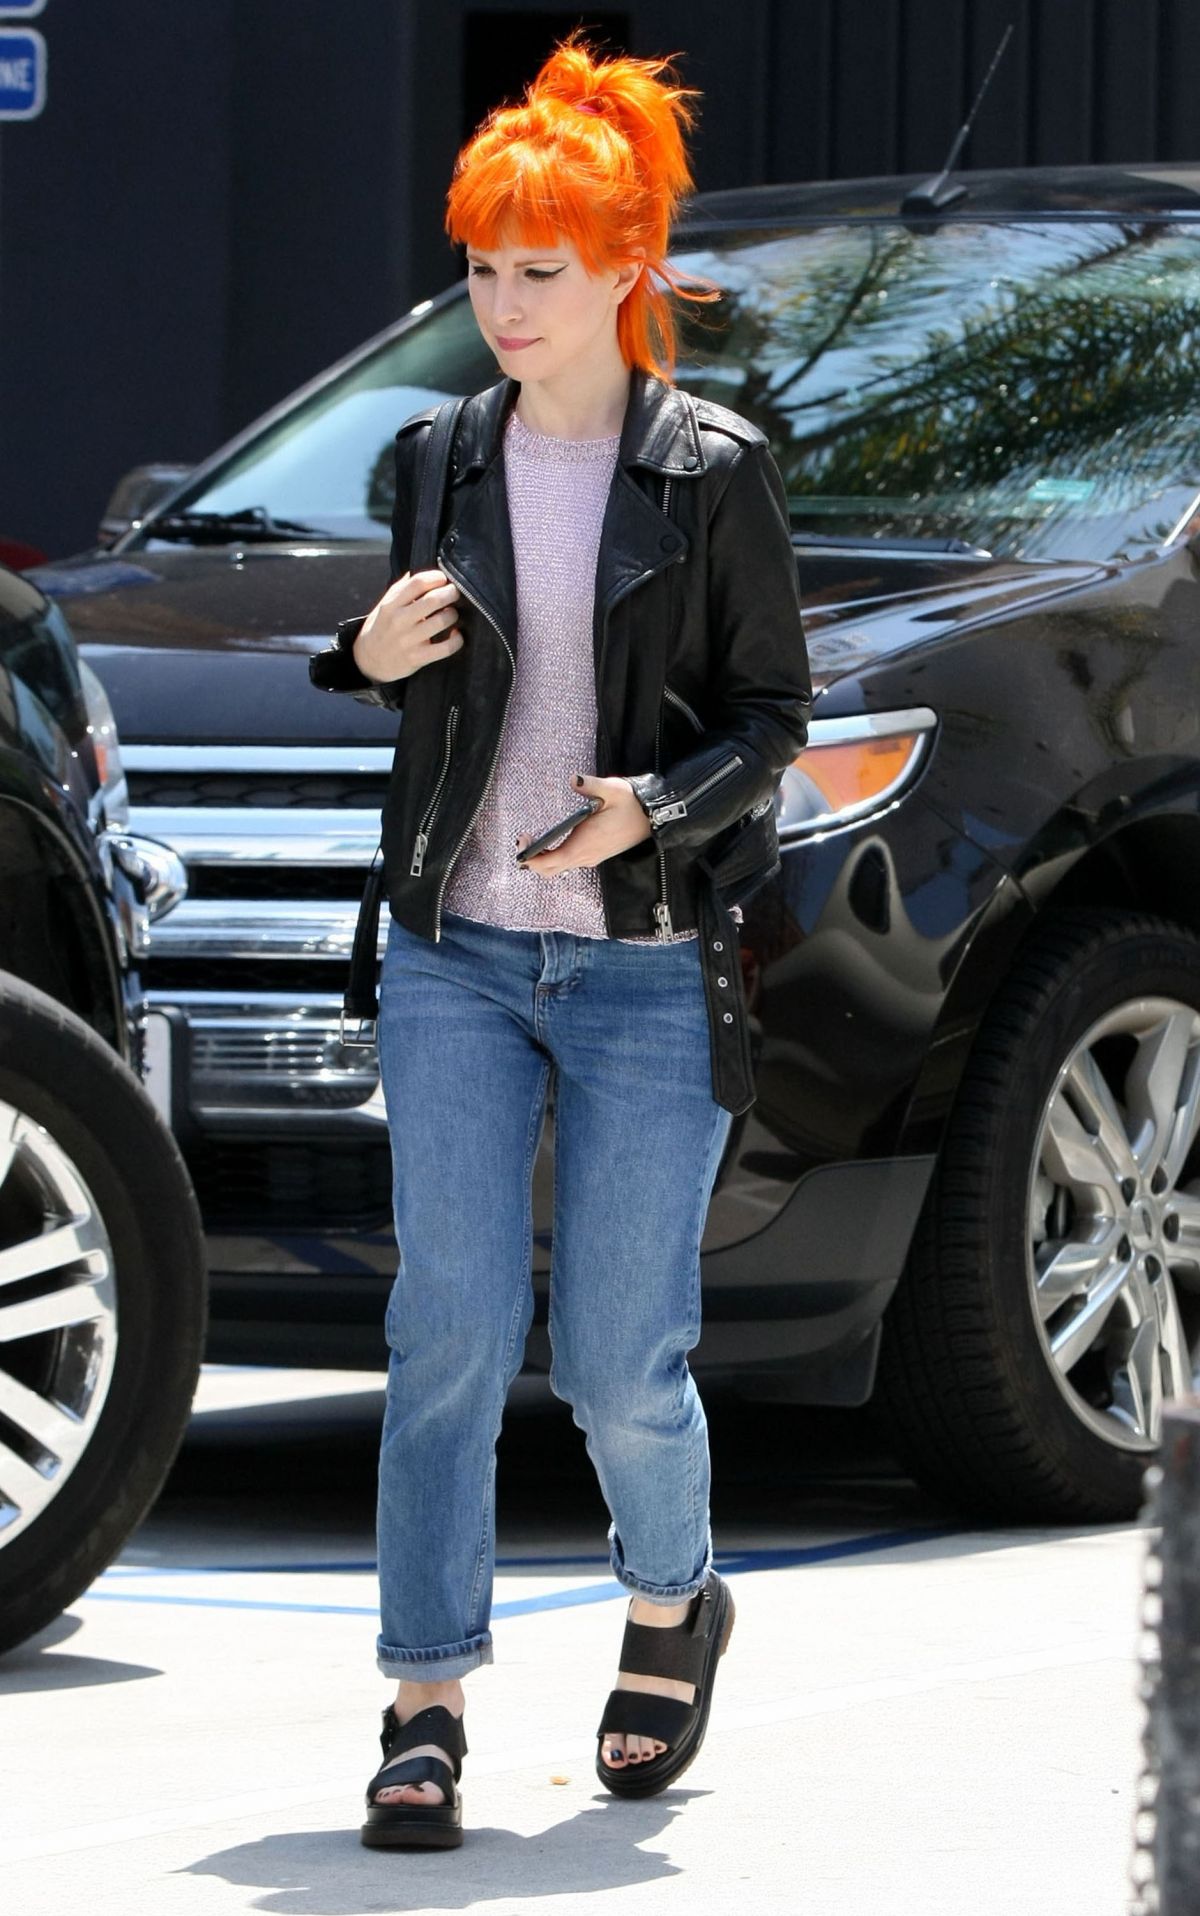 HAYLEY WILLIAMS Out and About in Los Angeles 05/23/2015.